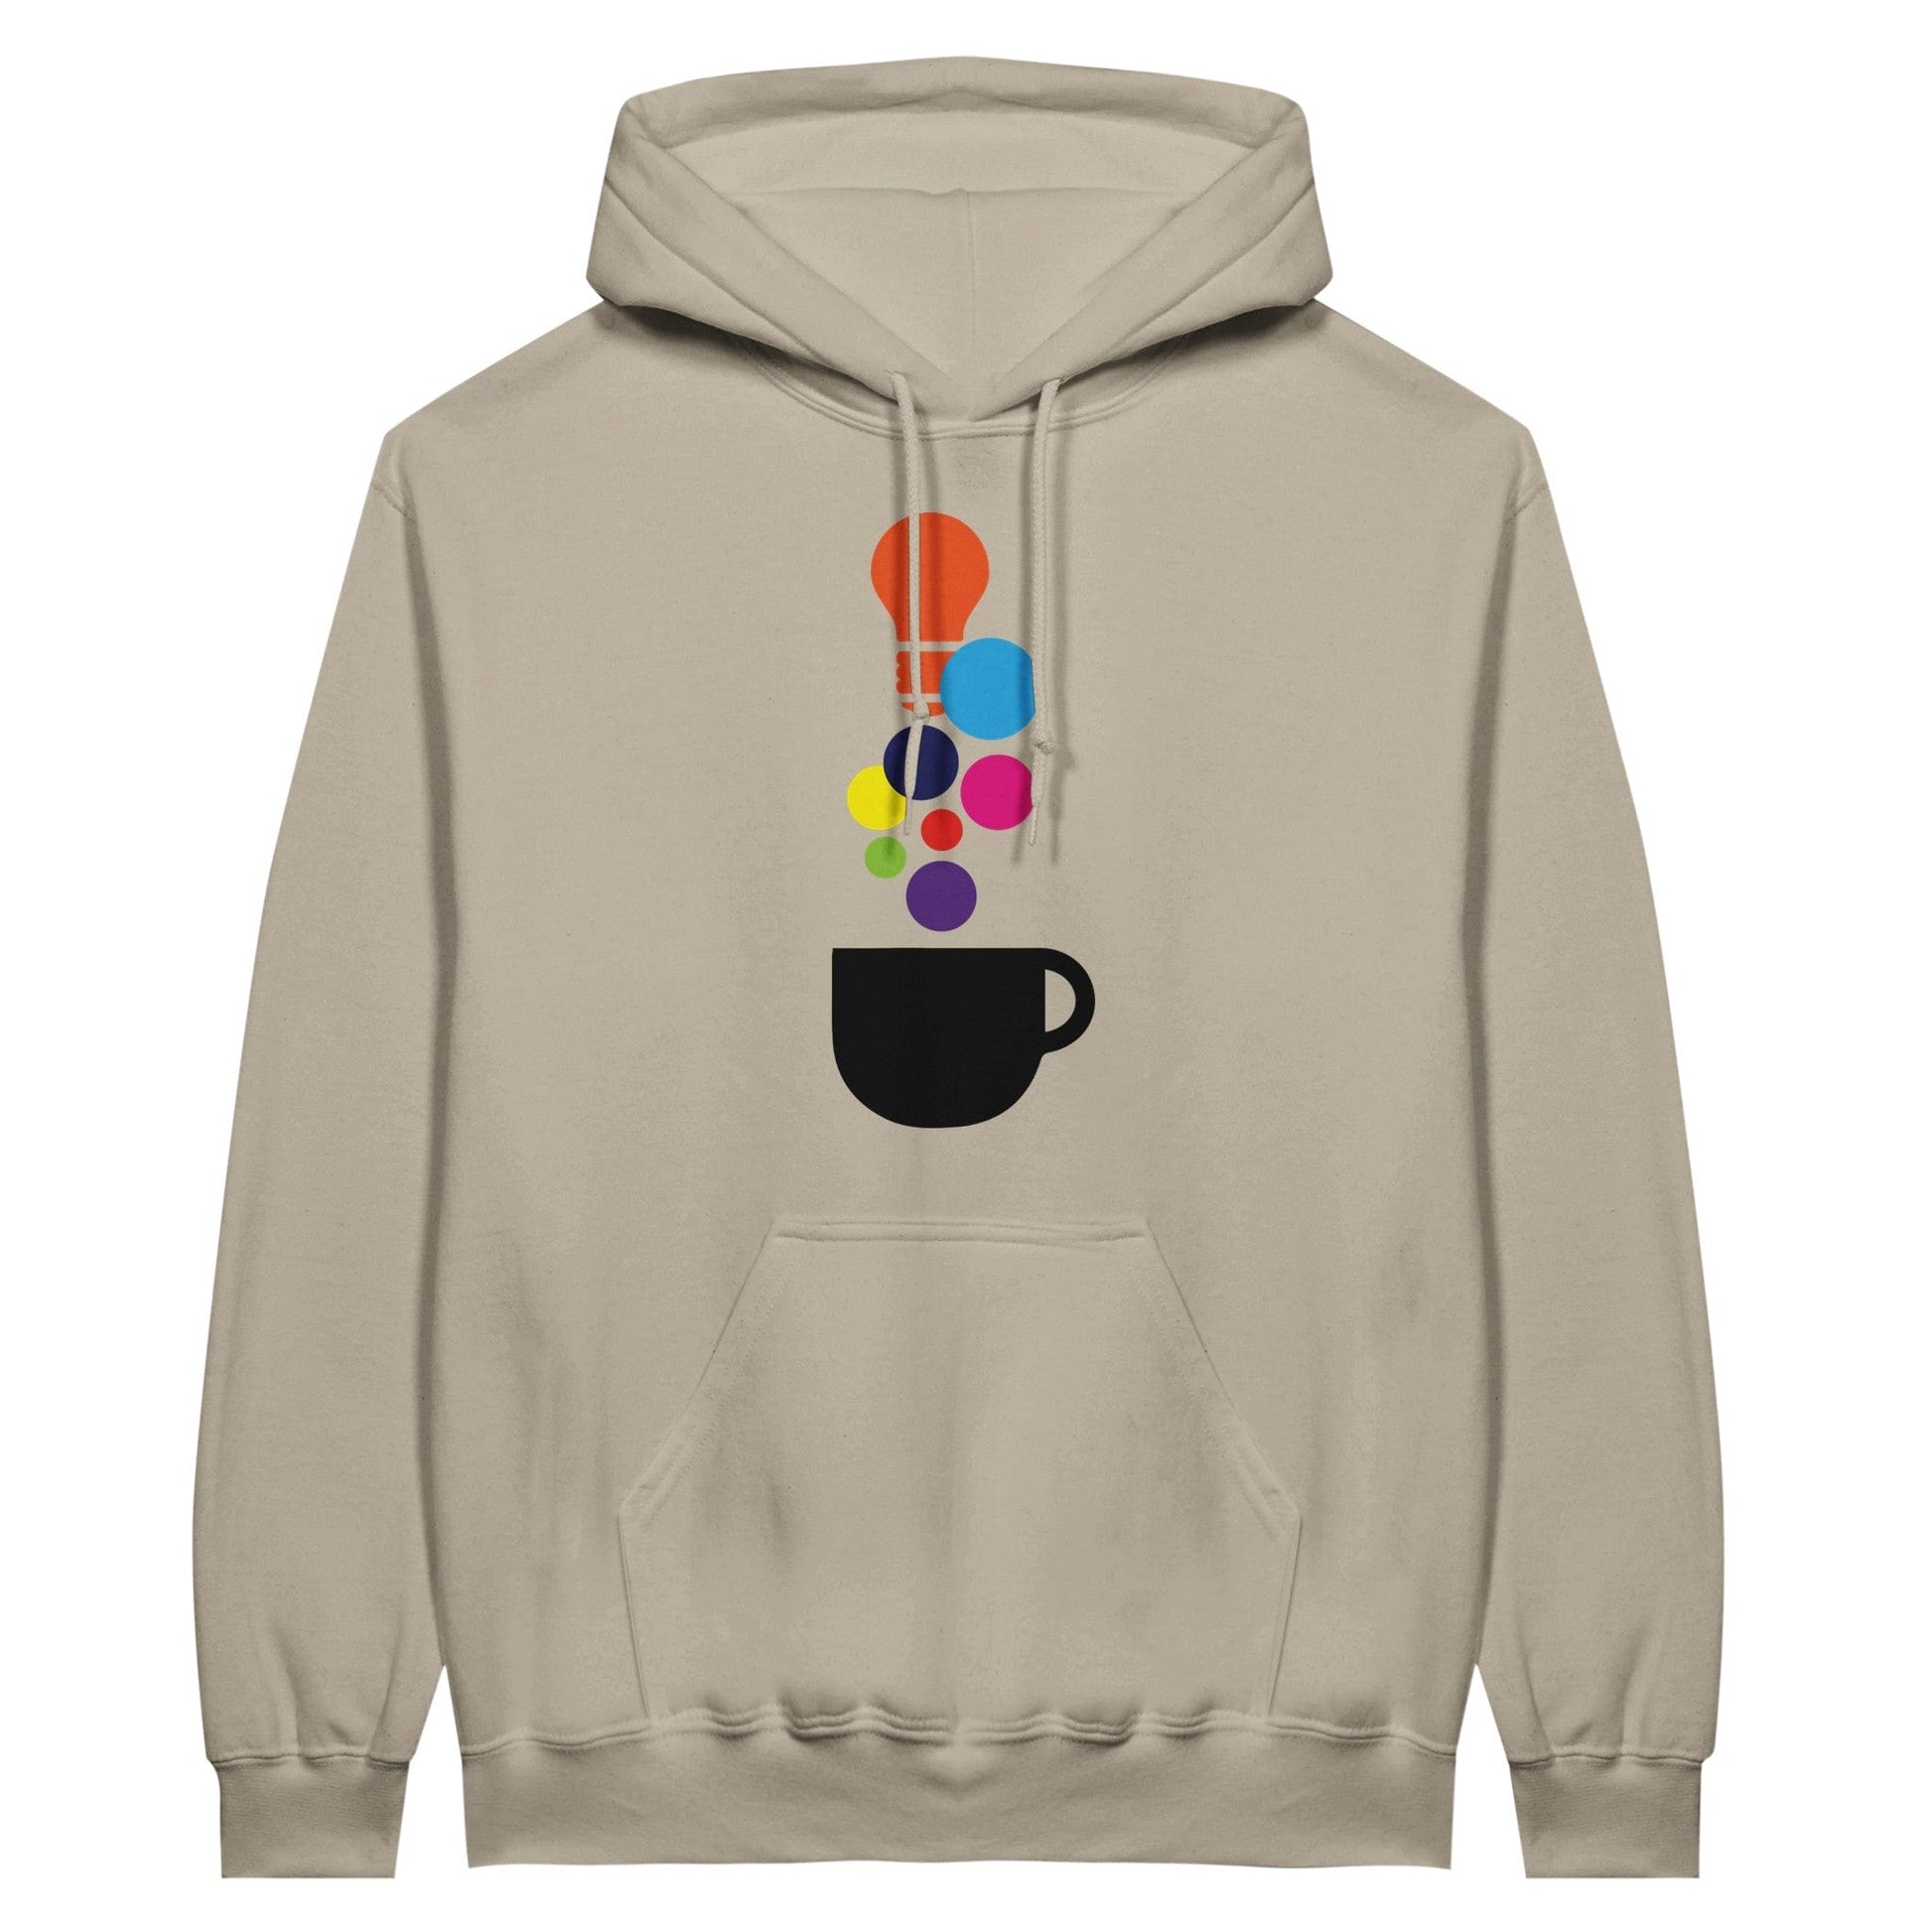 Good Bean Gifts "Creativity in a Cup" - Classic Unisex Pullover Hoodie 4XL / Sand